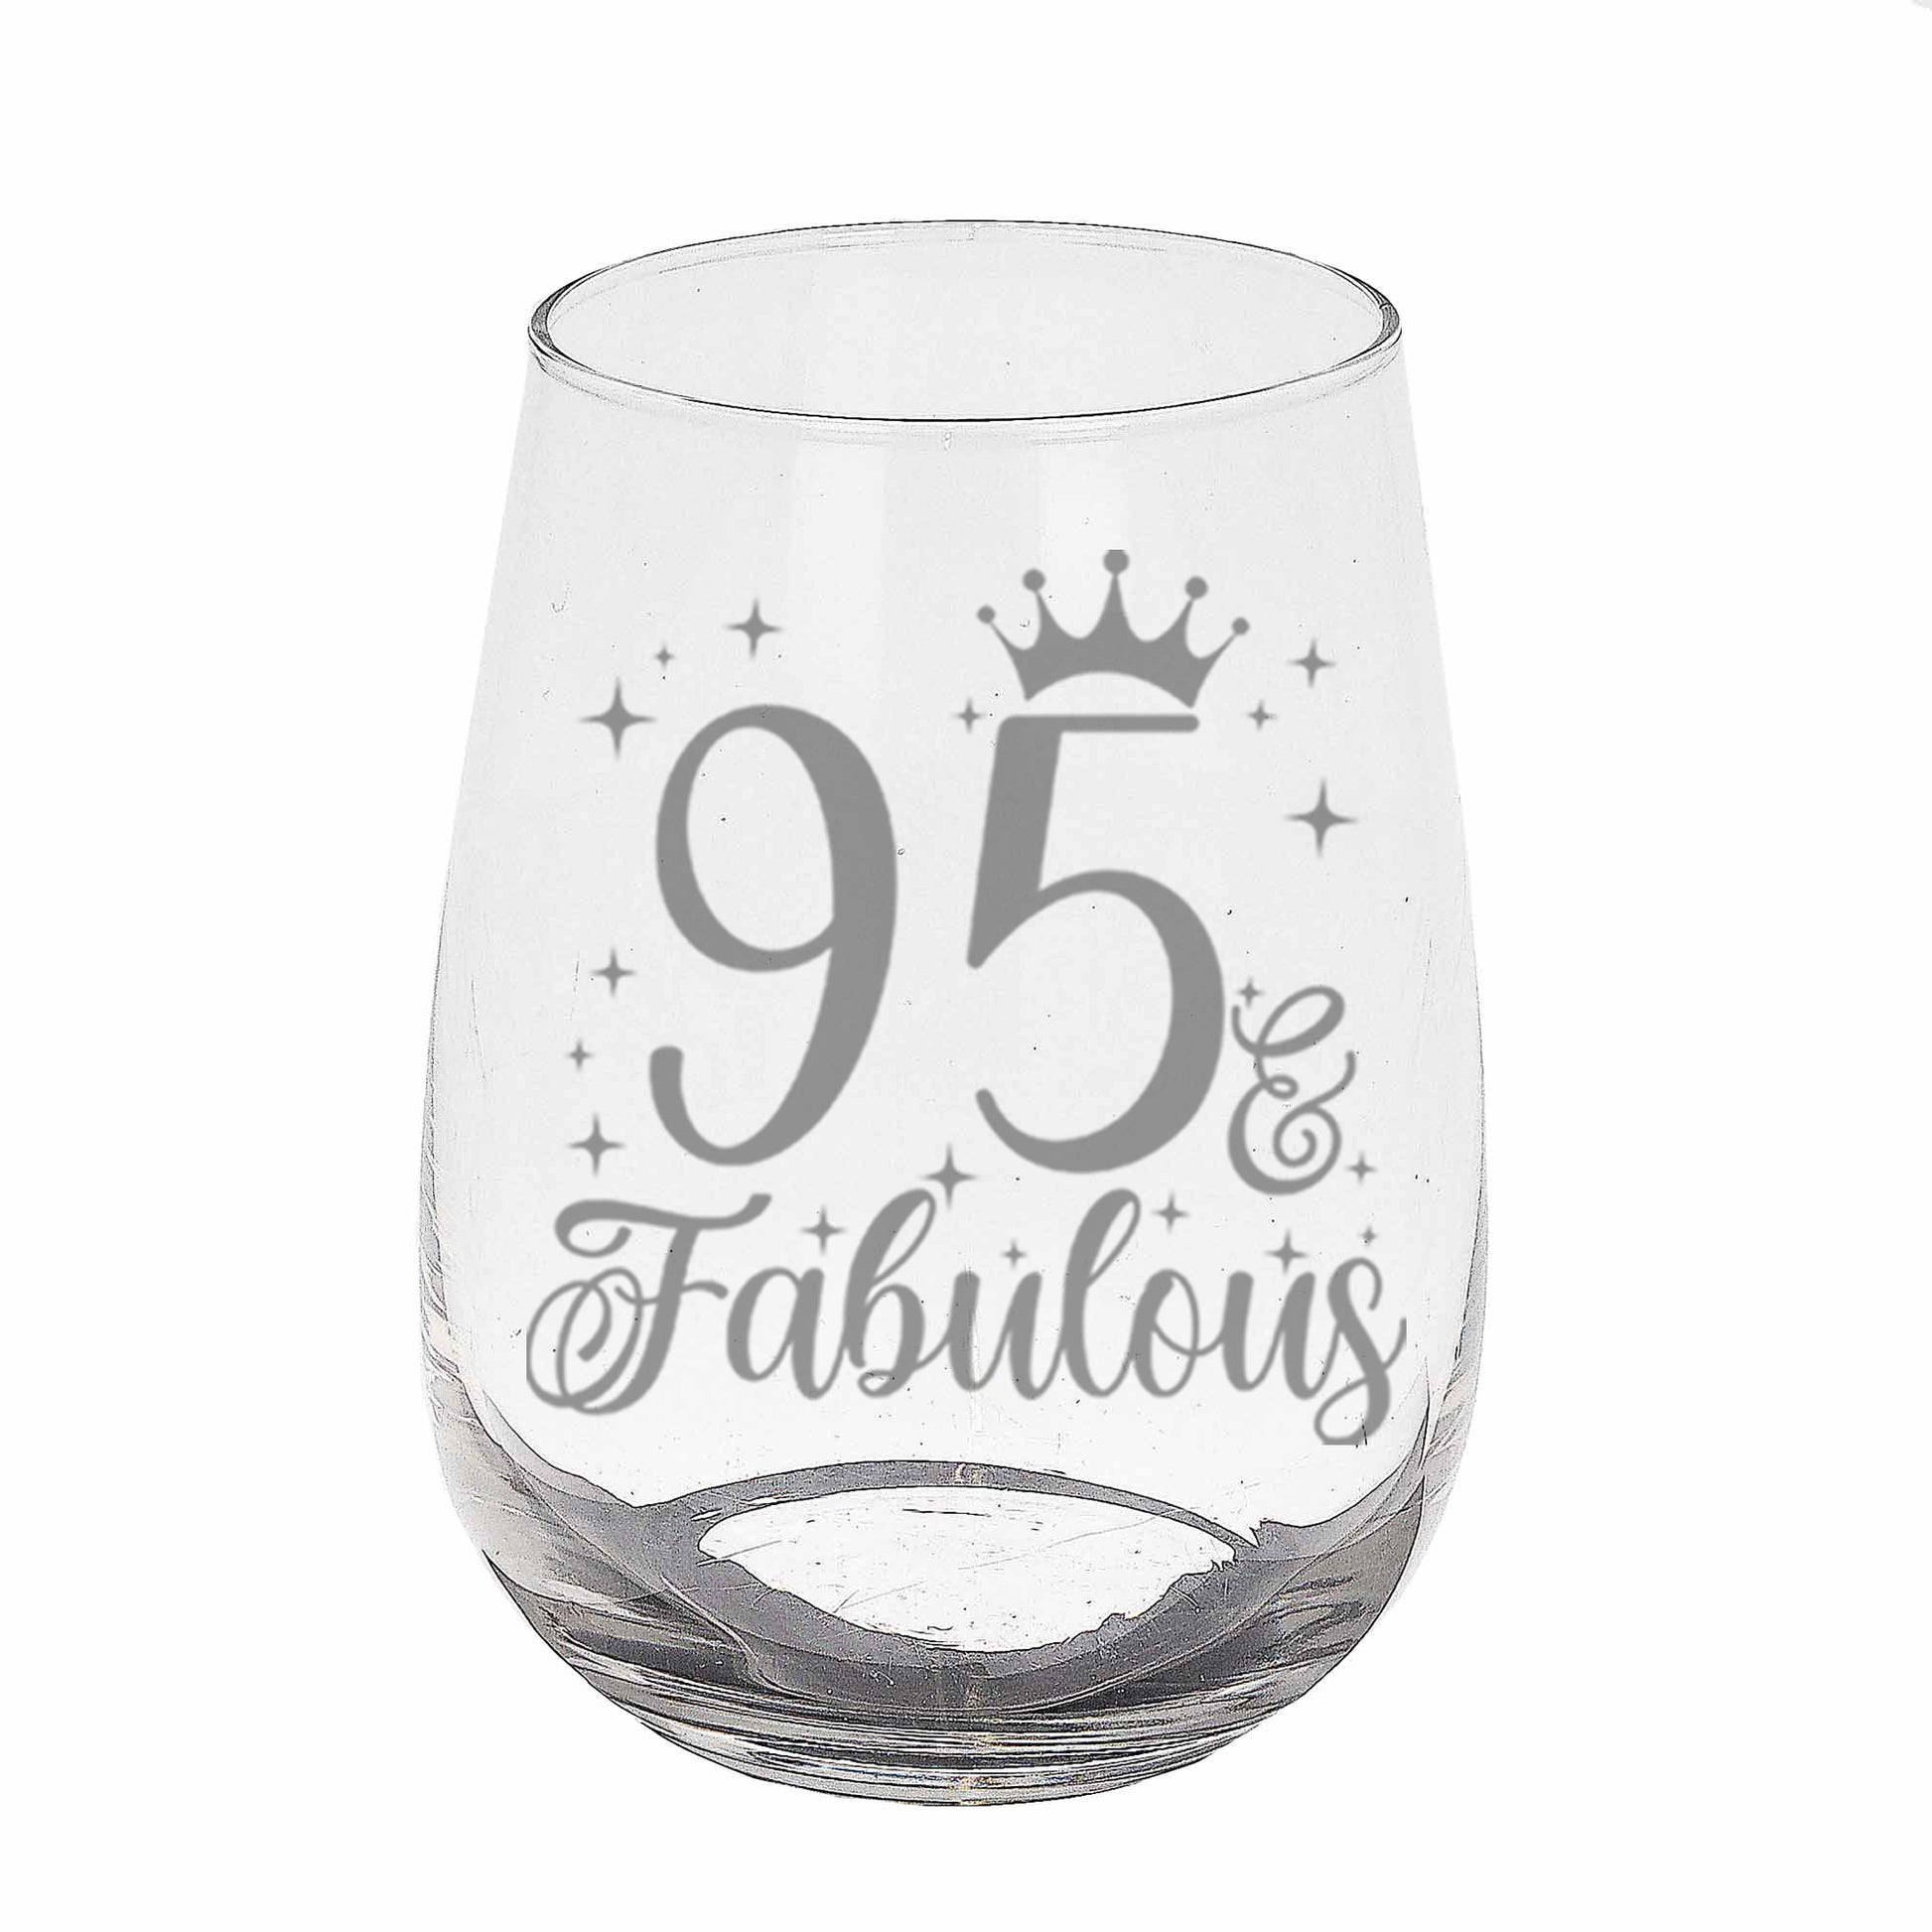 95 & Fabulous Engraved Stemless Gin Glass and/or Coaster Set  - Always Looking Good - Stemless Gin Glass On Its Own  